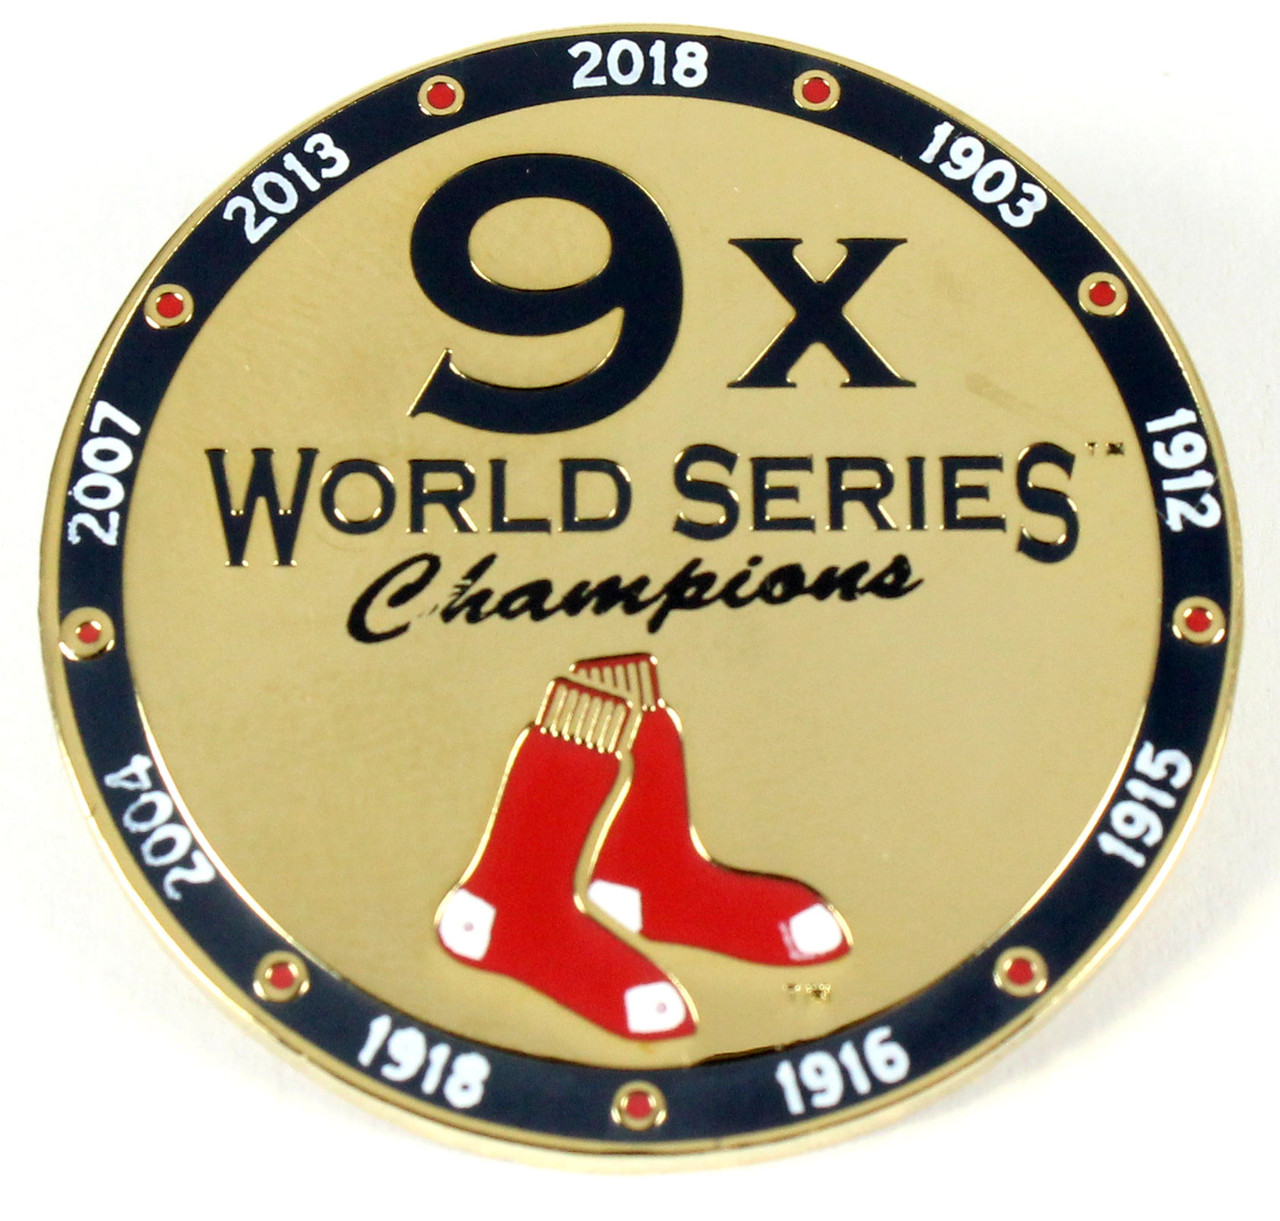 Boston Red Sox 9-Time World Series Champions Pin - Limited 1,000